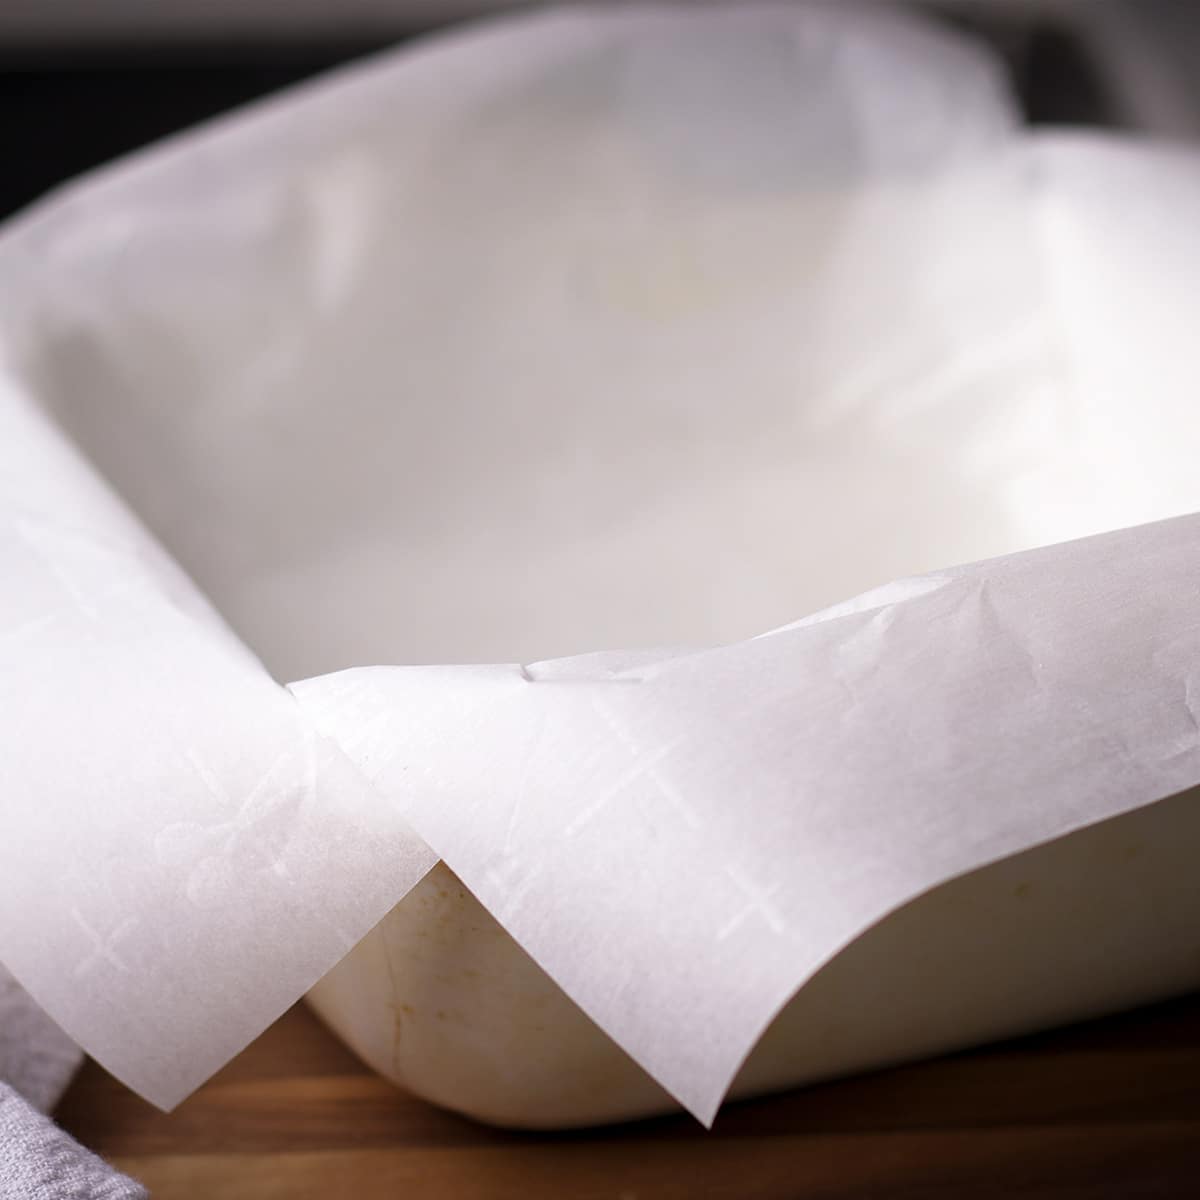 Two pieces of parchment paper set inside a baking dish to line the inside of the dish.